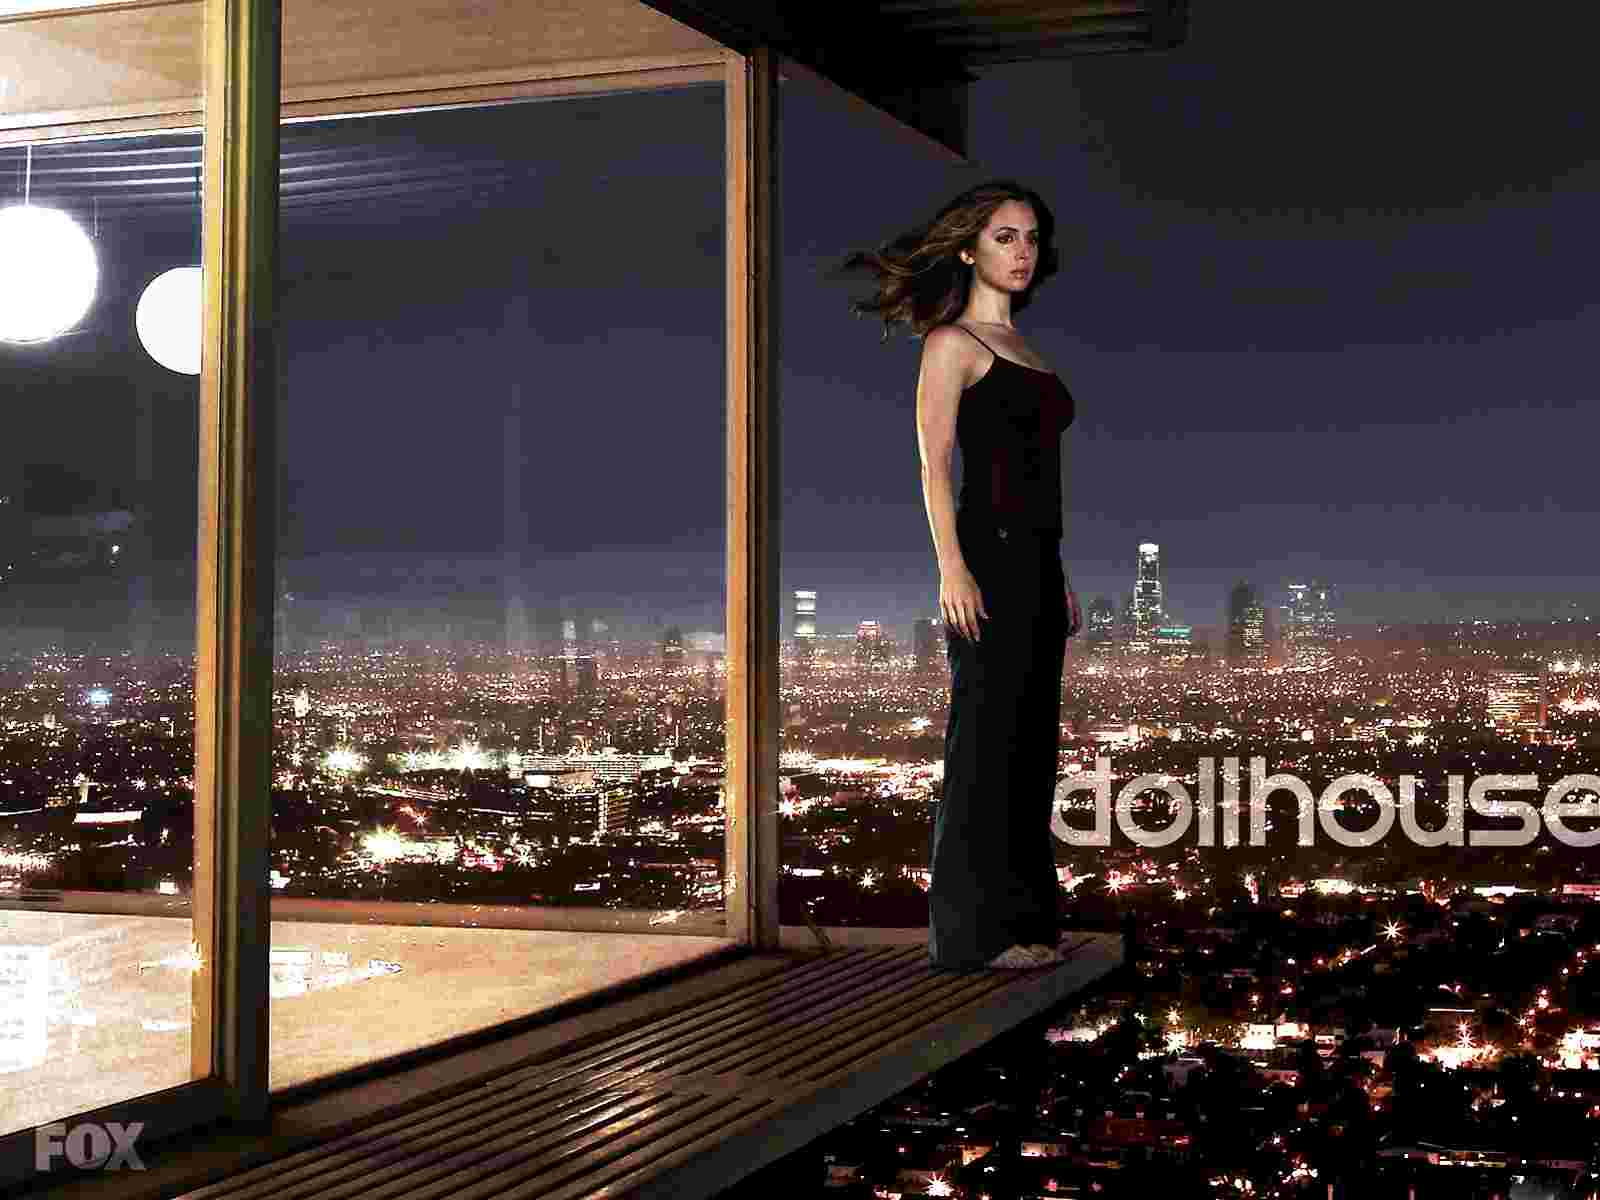 In Dollhouse Wallpaper Movies Collection